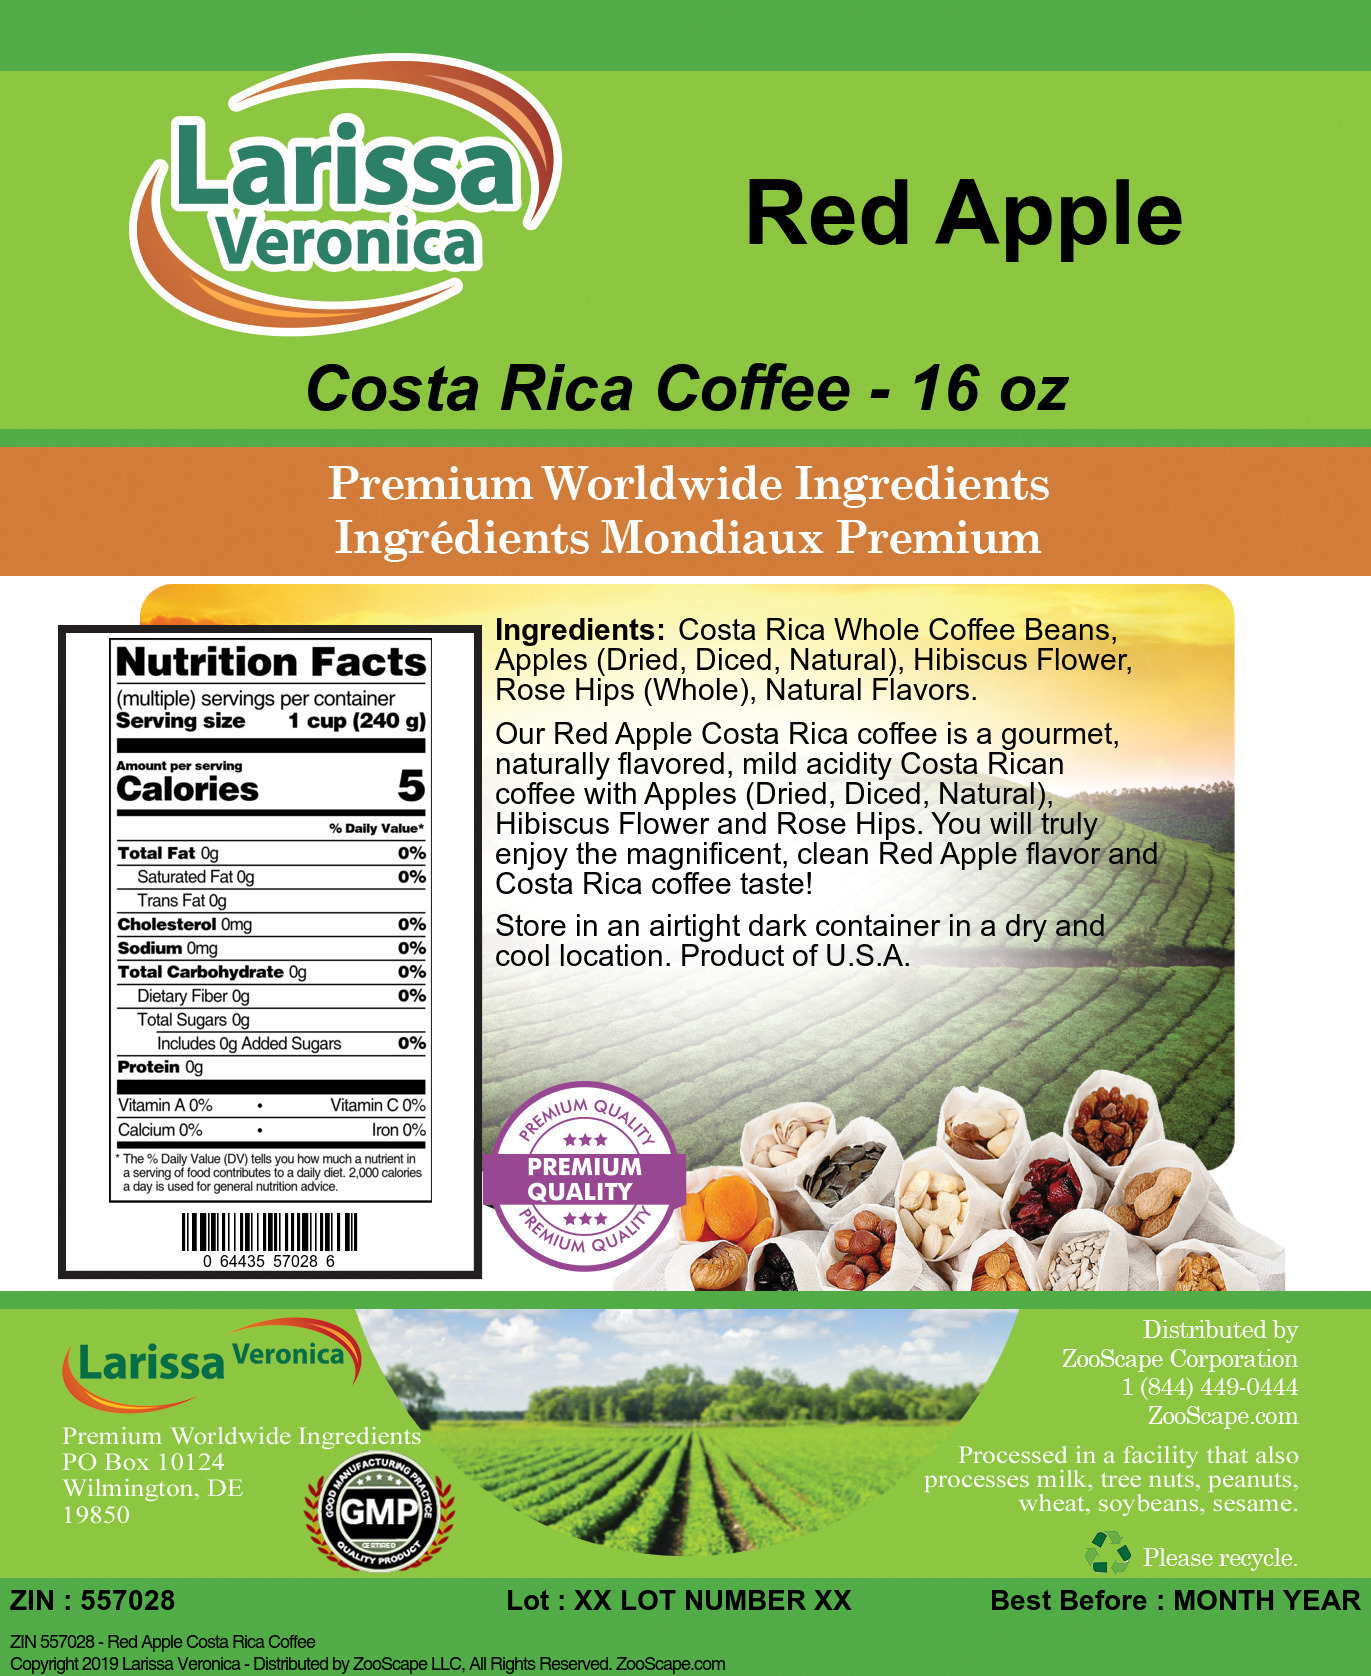 Red Apple Costa Rica Coffee - Label